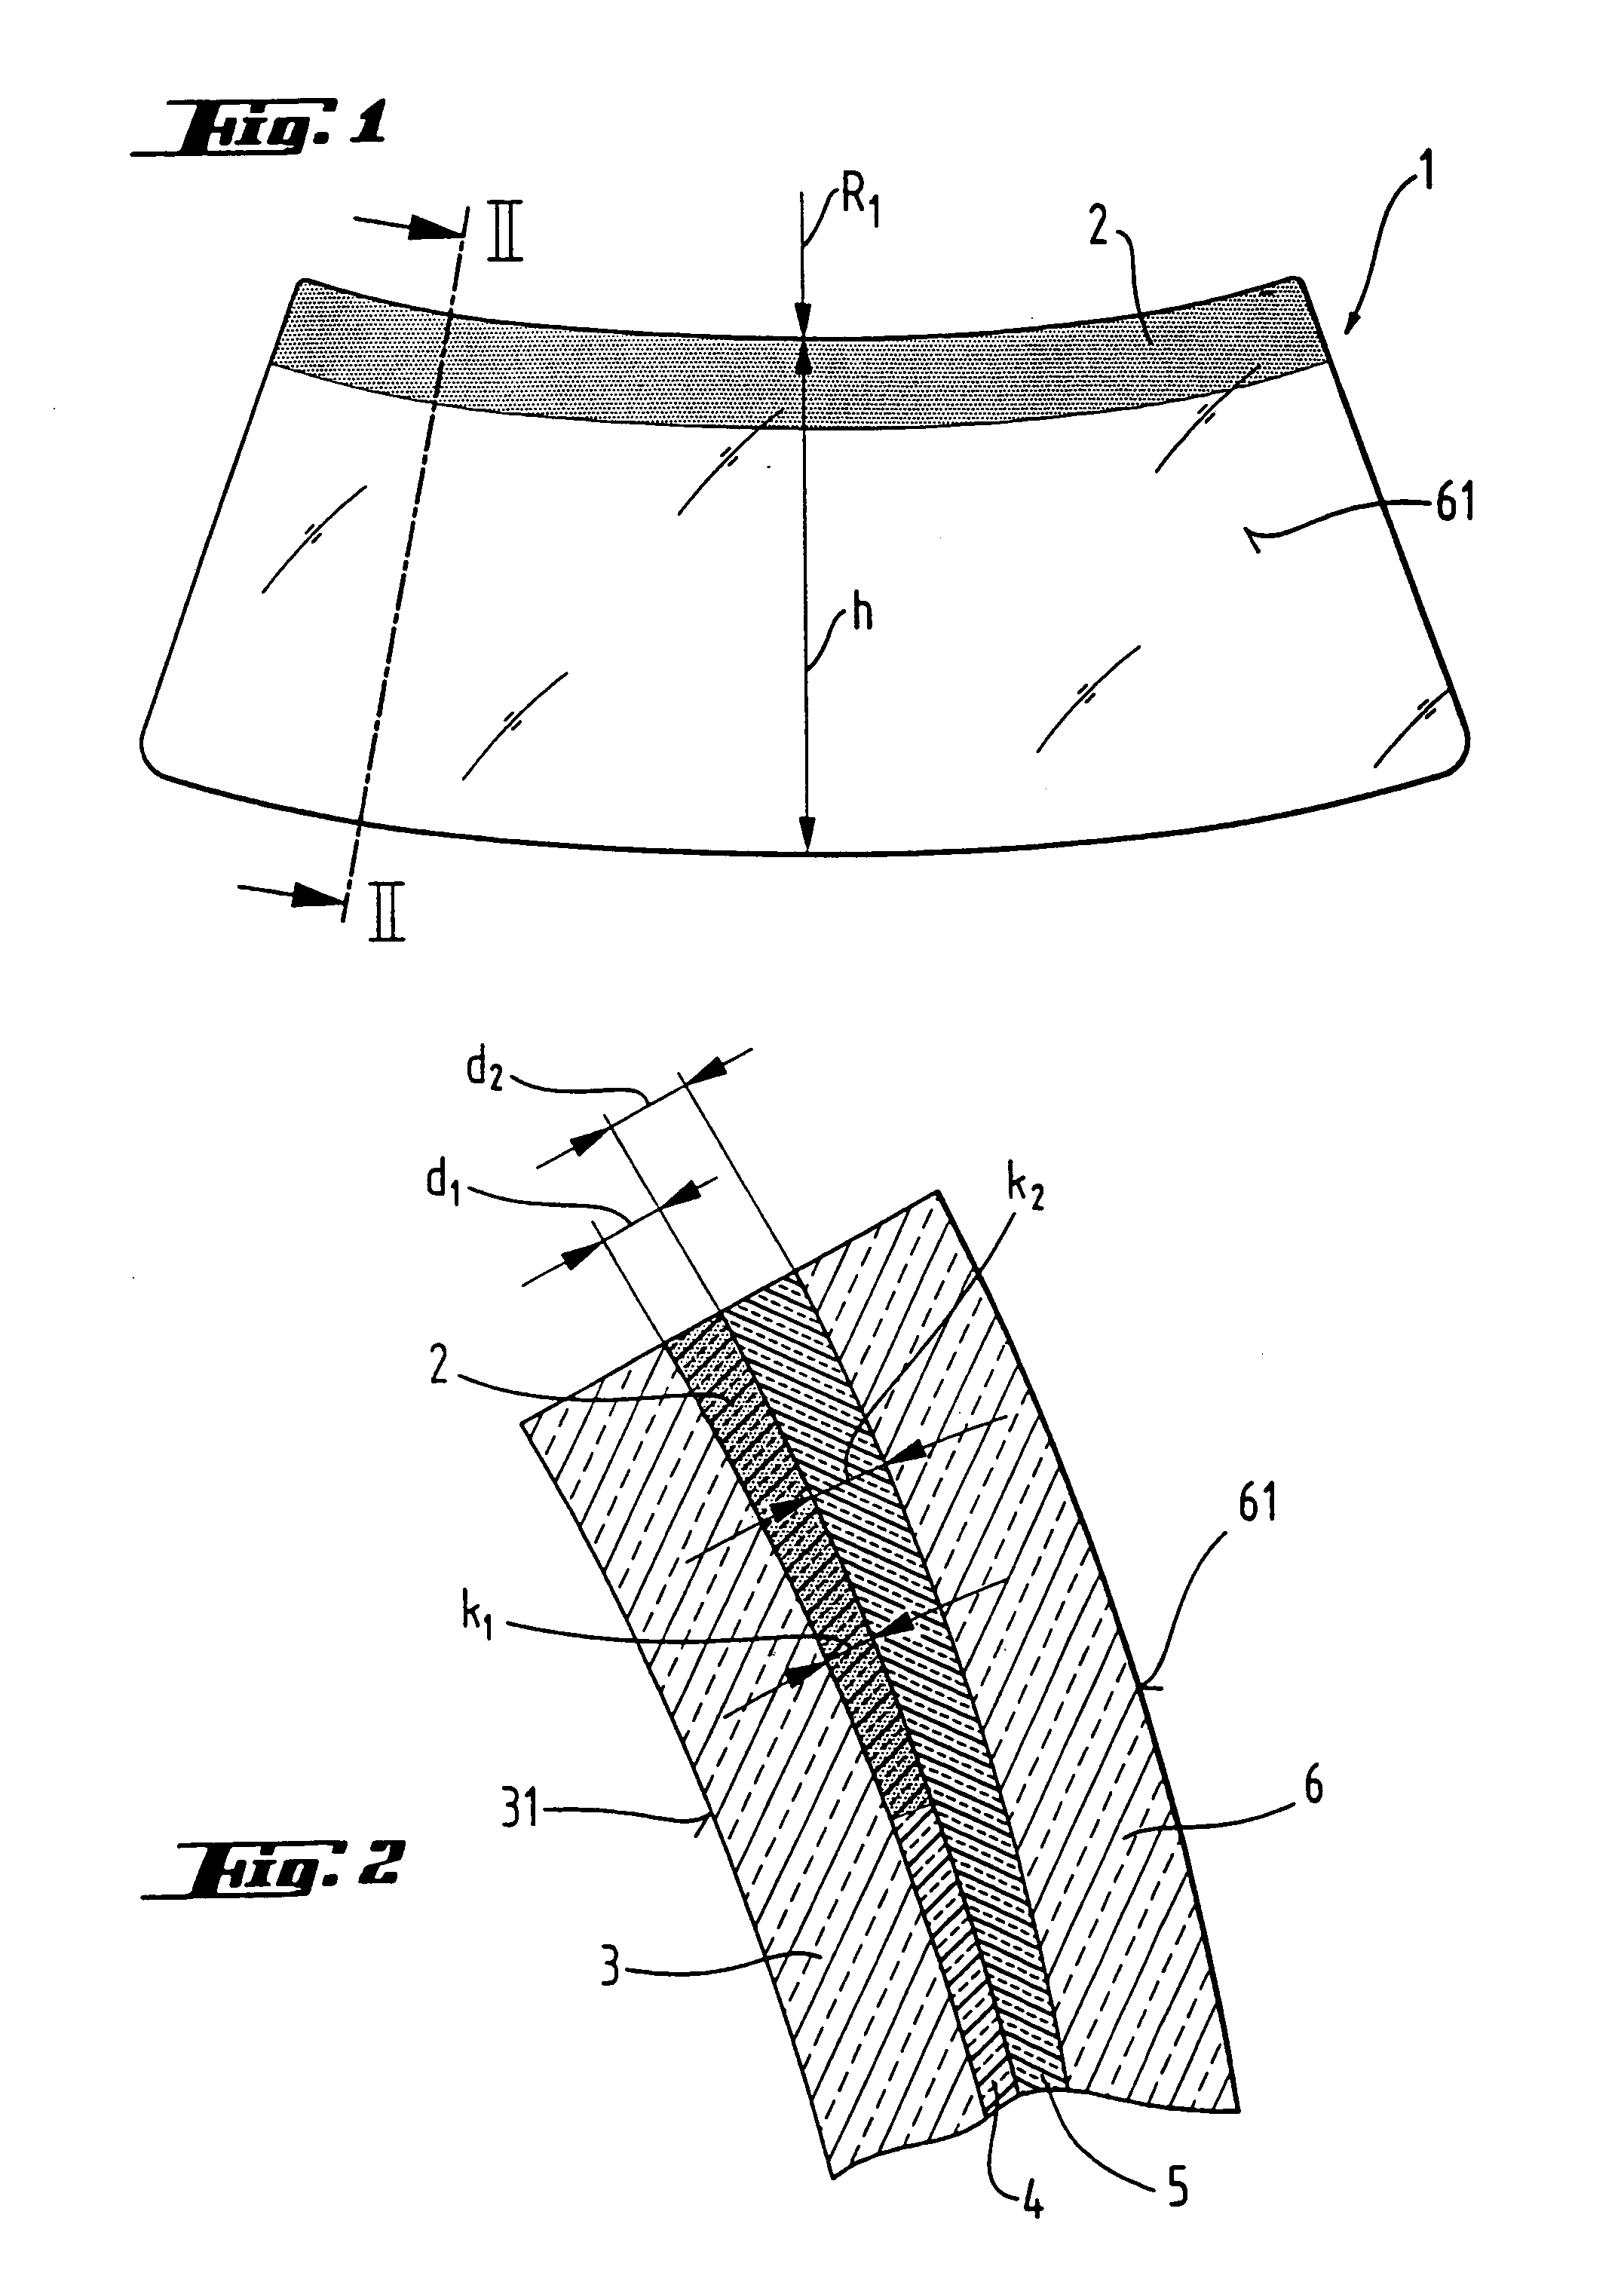 Laminated glass windscreen intended to be used at the same time as a HUD system reflector